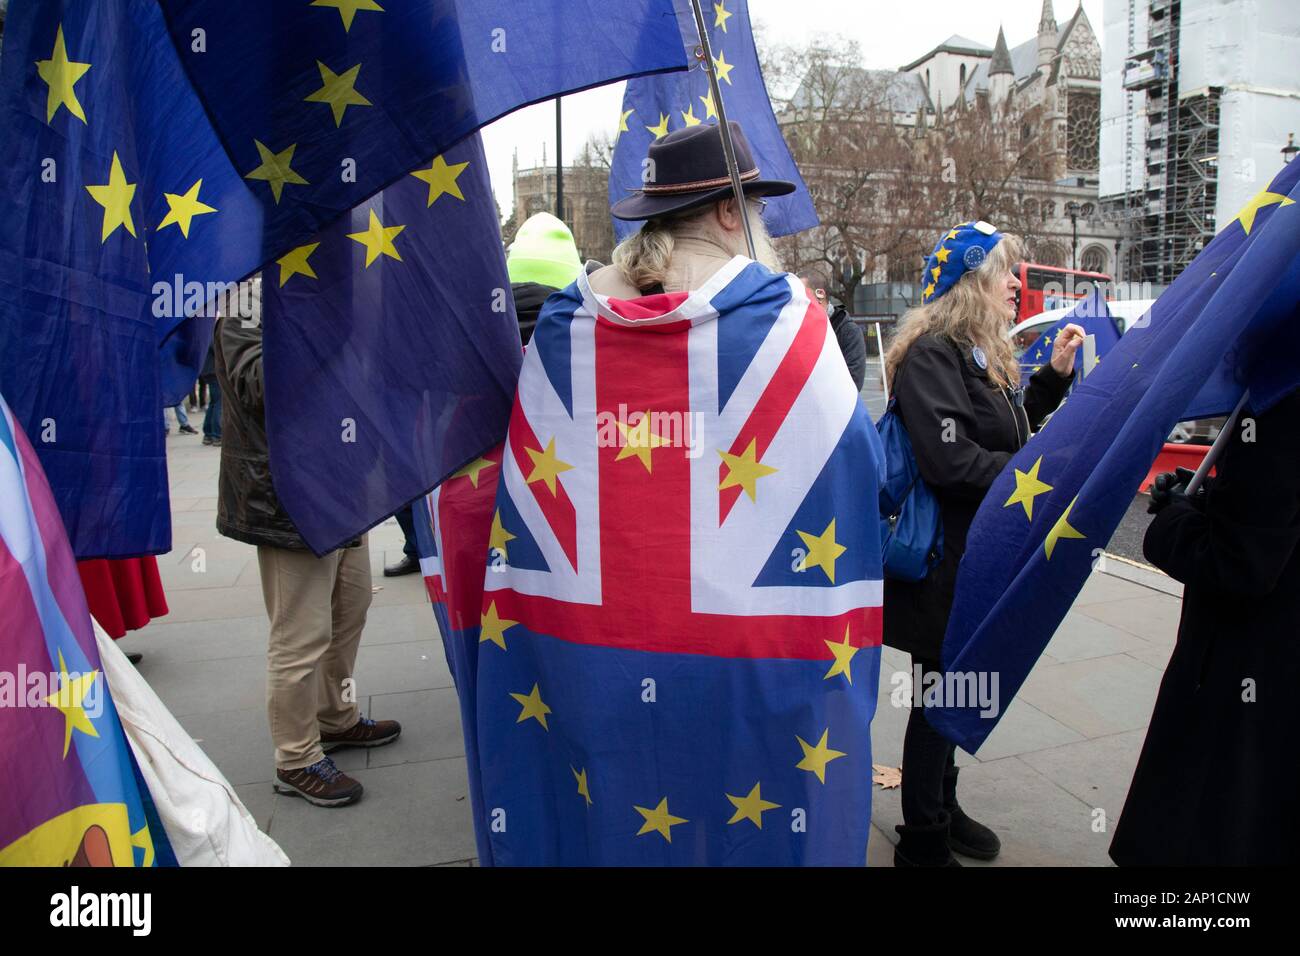 Anti Brexit protesters waving European Union flags in Westminster outside Parliament on 8th January 2020 in London, England, United Kingdom. With a majority Conservative government in power and Brexit day at the end of January looming, the role of these protesters is now to demonstrate in the hope of the softest Brexit deal possible. Stock Photo